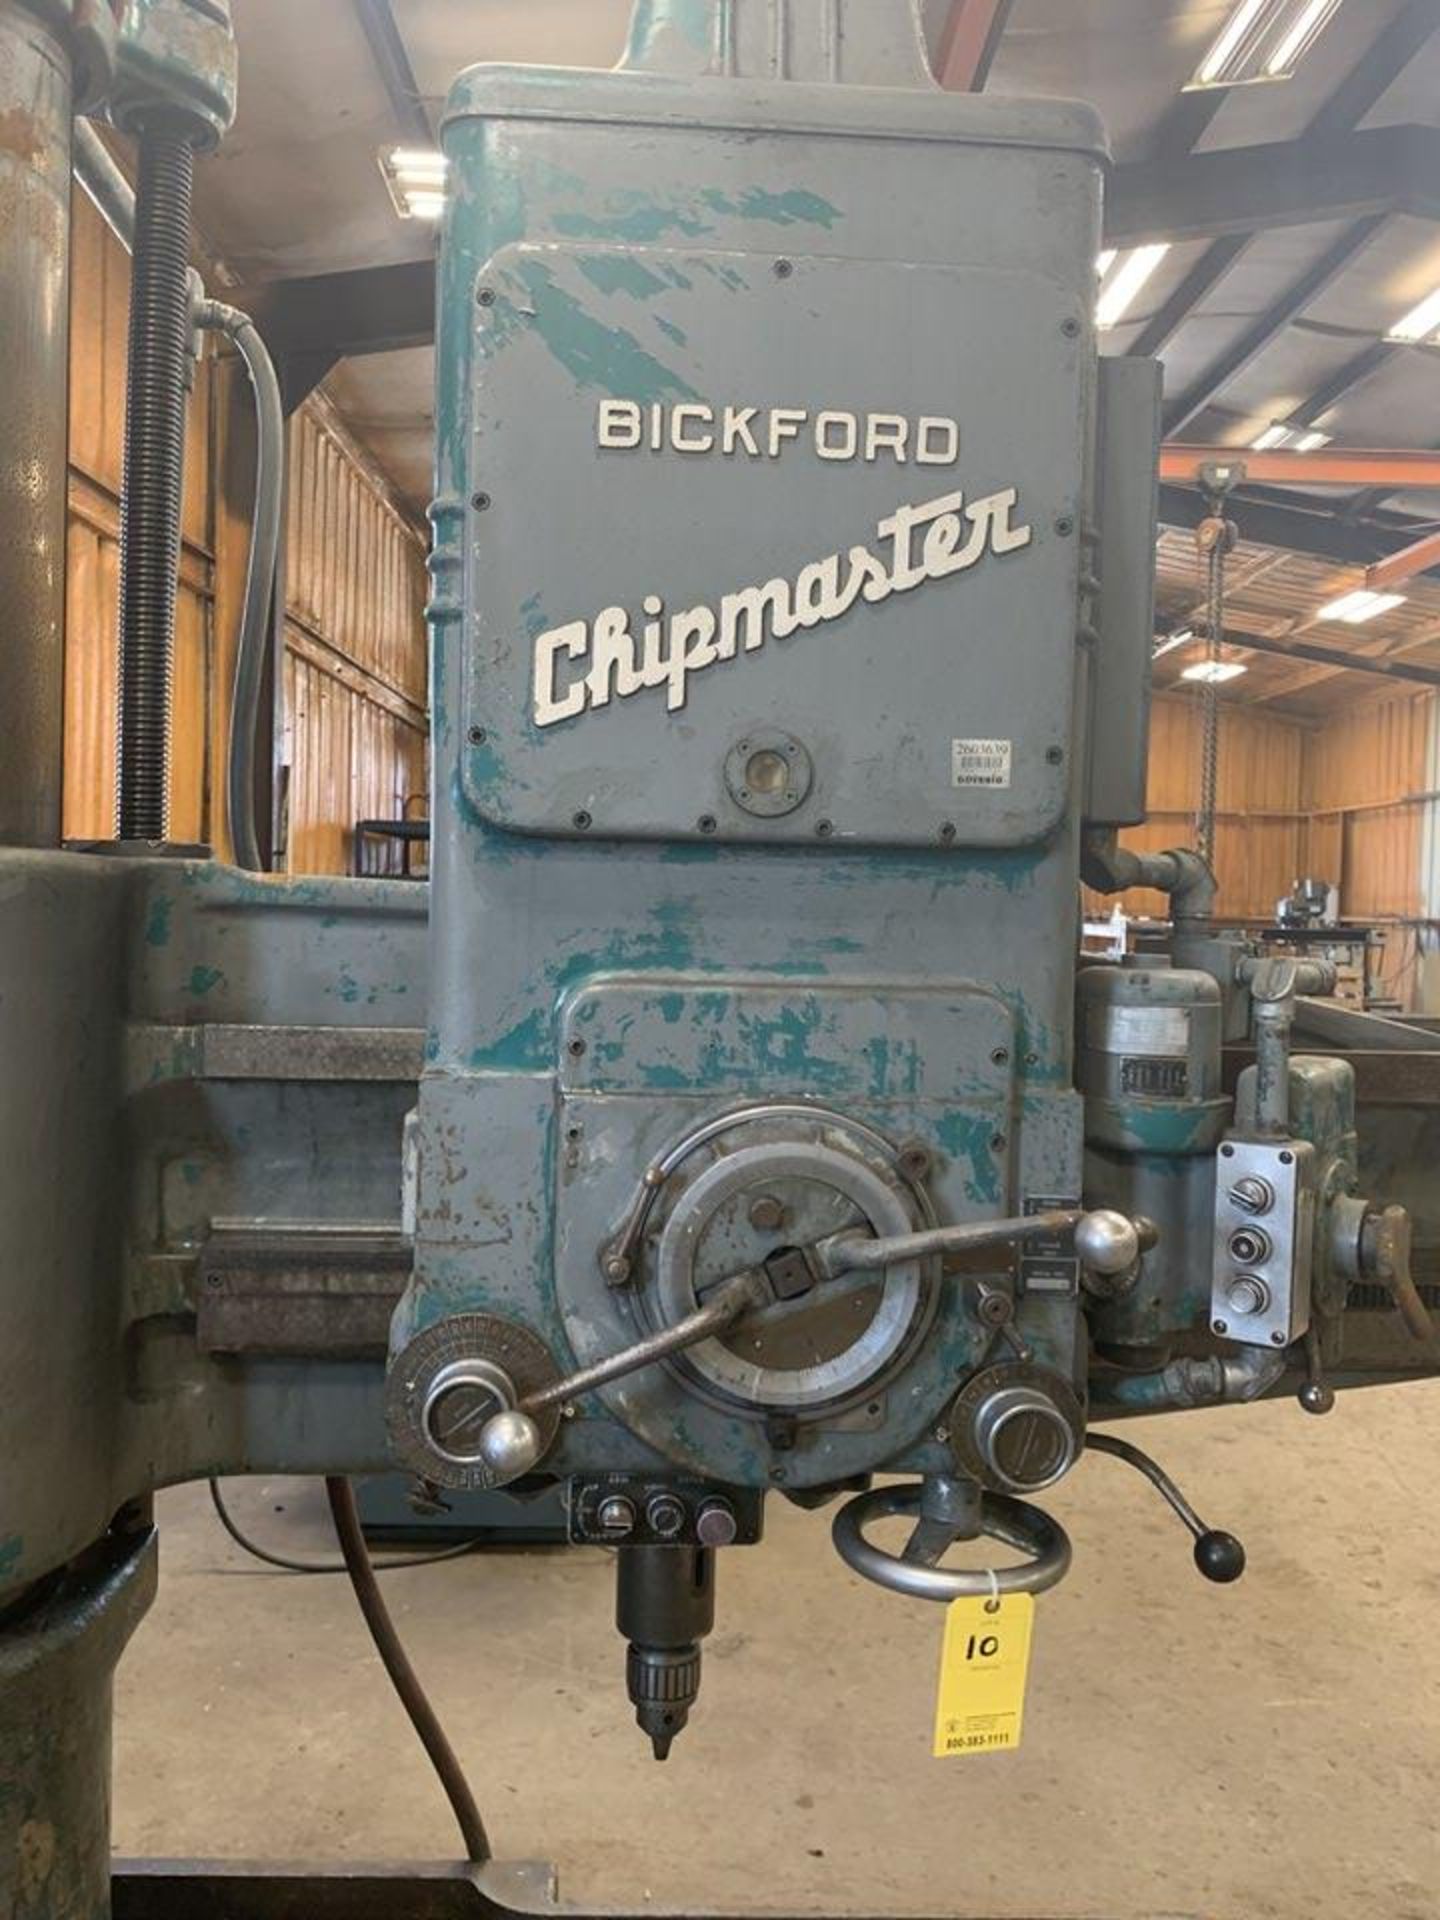 BICKFORD CHIPMASTER RADIAL ARM DRILL, TYPE 935, 4' ARM, 13" COLUMN - Image 2 of 4